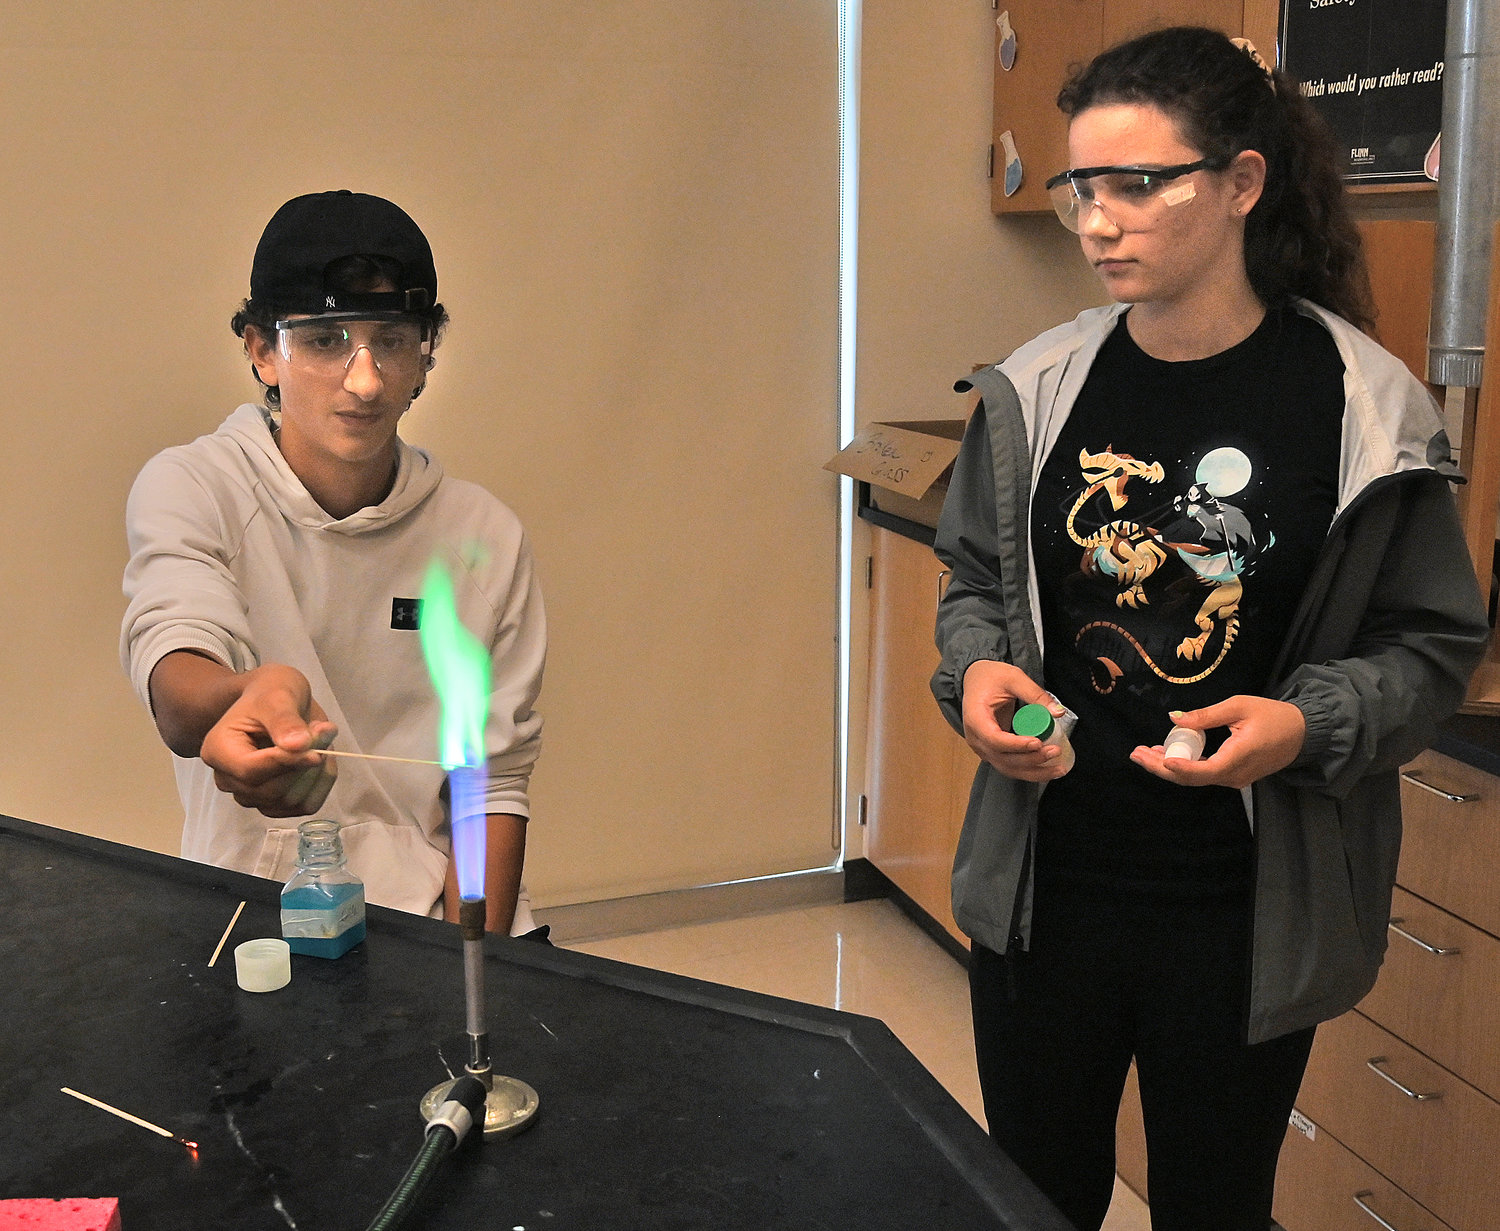 New Hartford Central School junior science students Gianni Trevisani, left, and Meredith Porter make colorful flames.